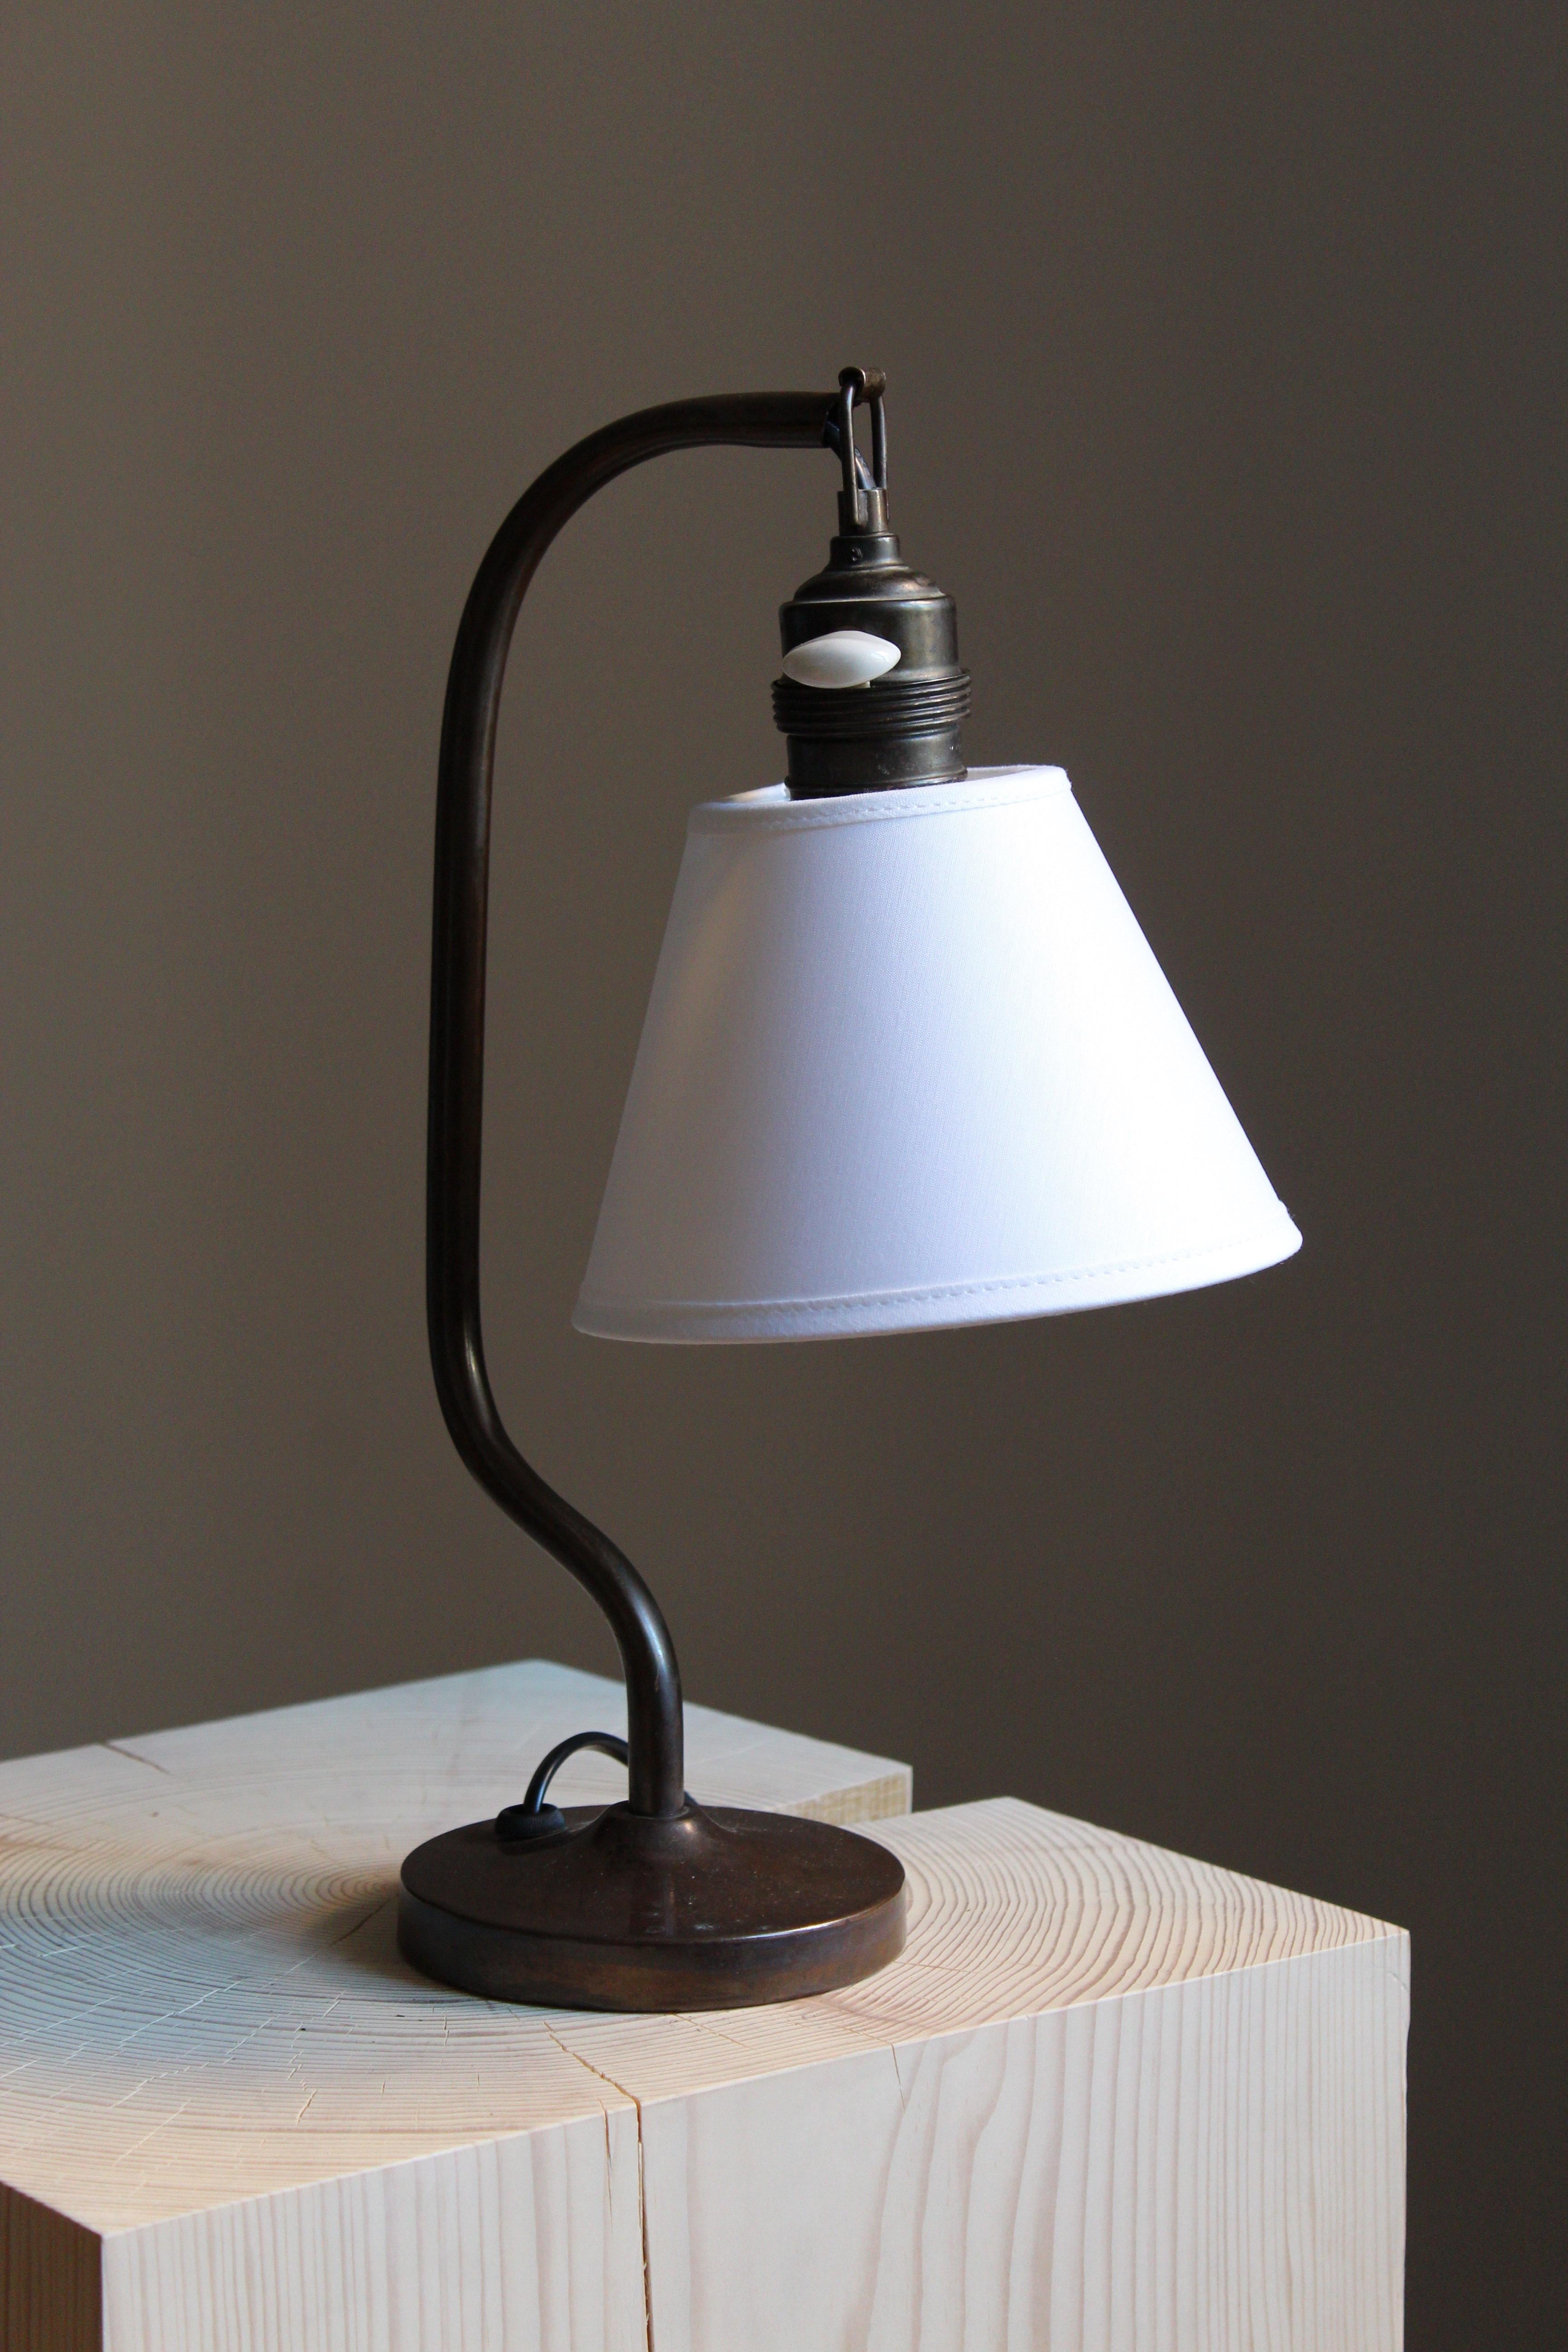 A table light or desk lamp. By an unknown Swedish designer and producer. In patinated brass. Sold without lampshade.

Other designers of the period include Poul Henningsen, Hans Bergström, Kaare Klint, Jean Royere, and Paavo Tynell.